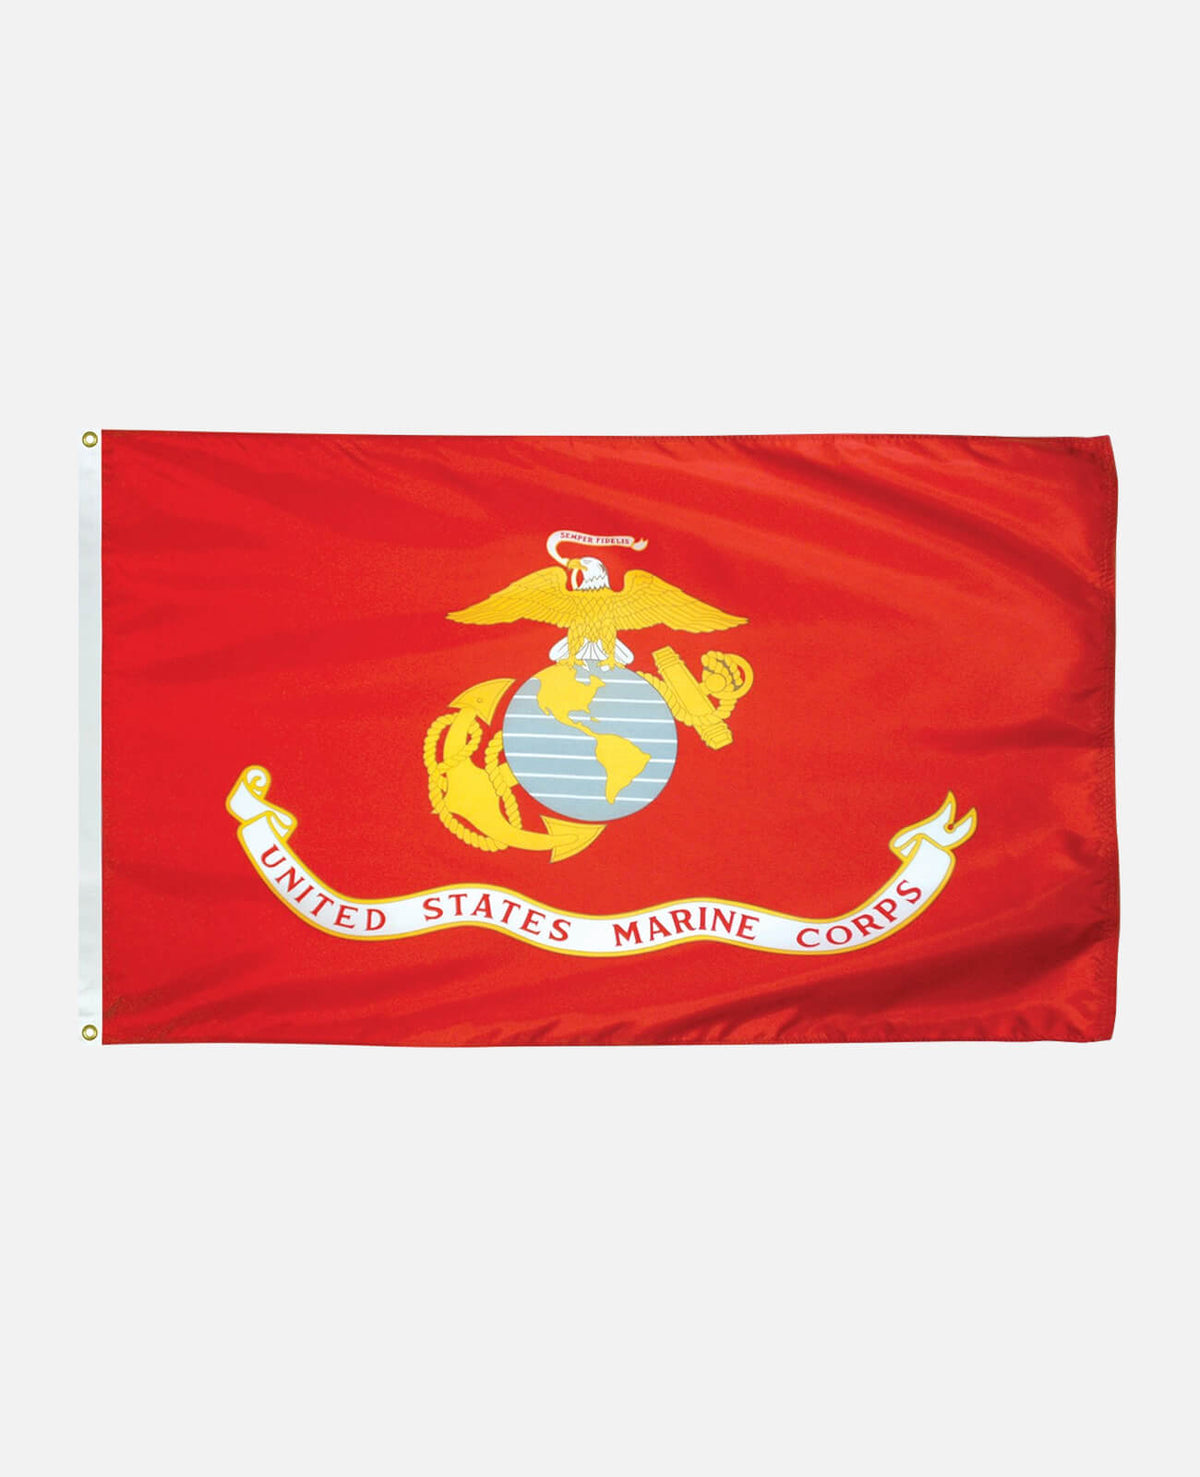 Flag of the United States Marine Corps 3'x5' Polyester, High Durability, American Made